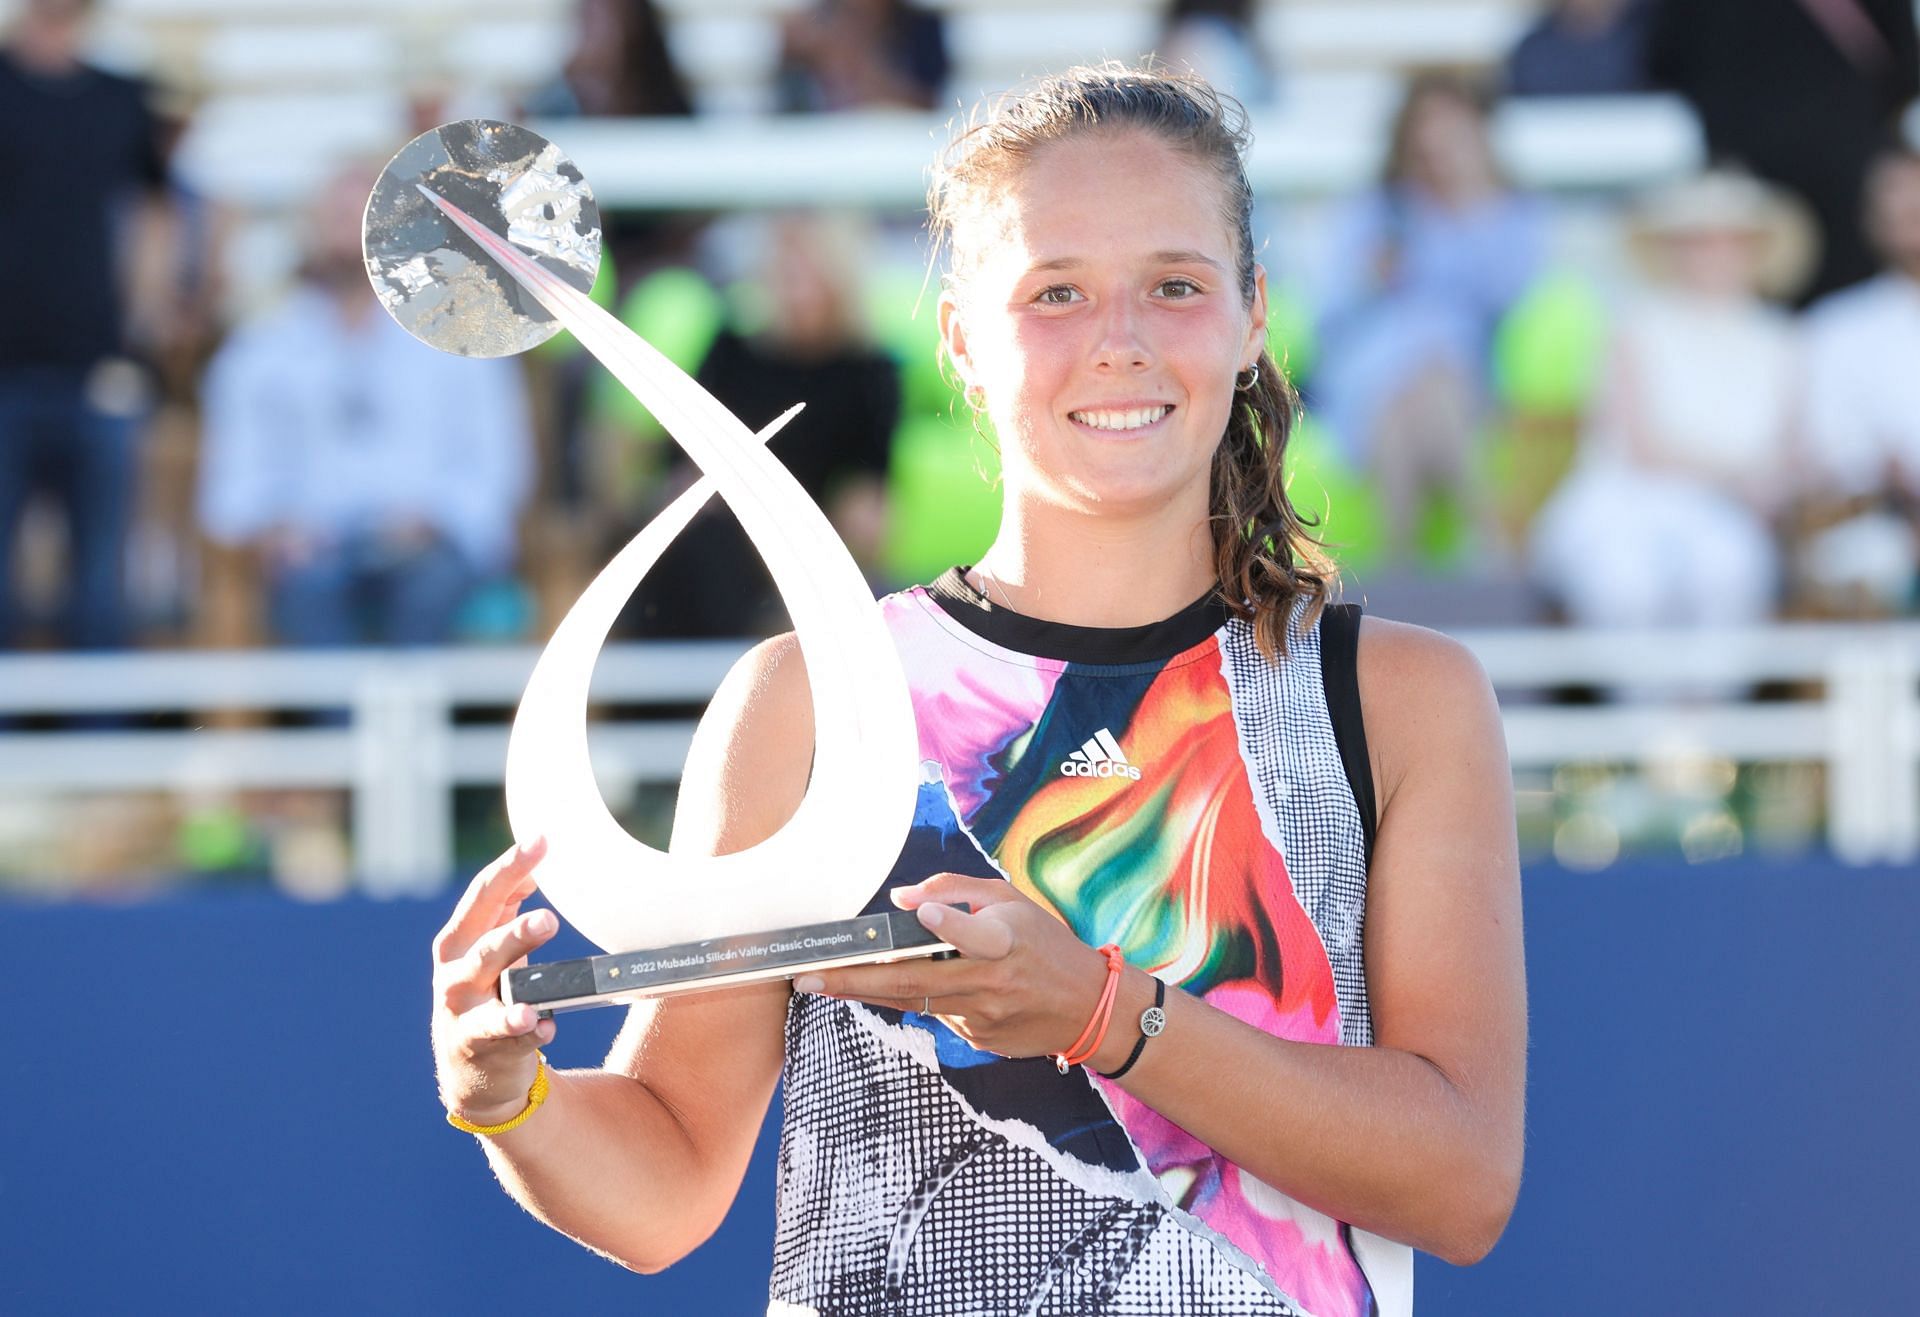 Daria Kasatkina will aim to win her second title of 2022